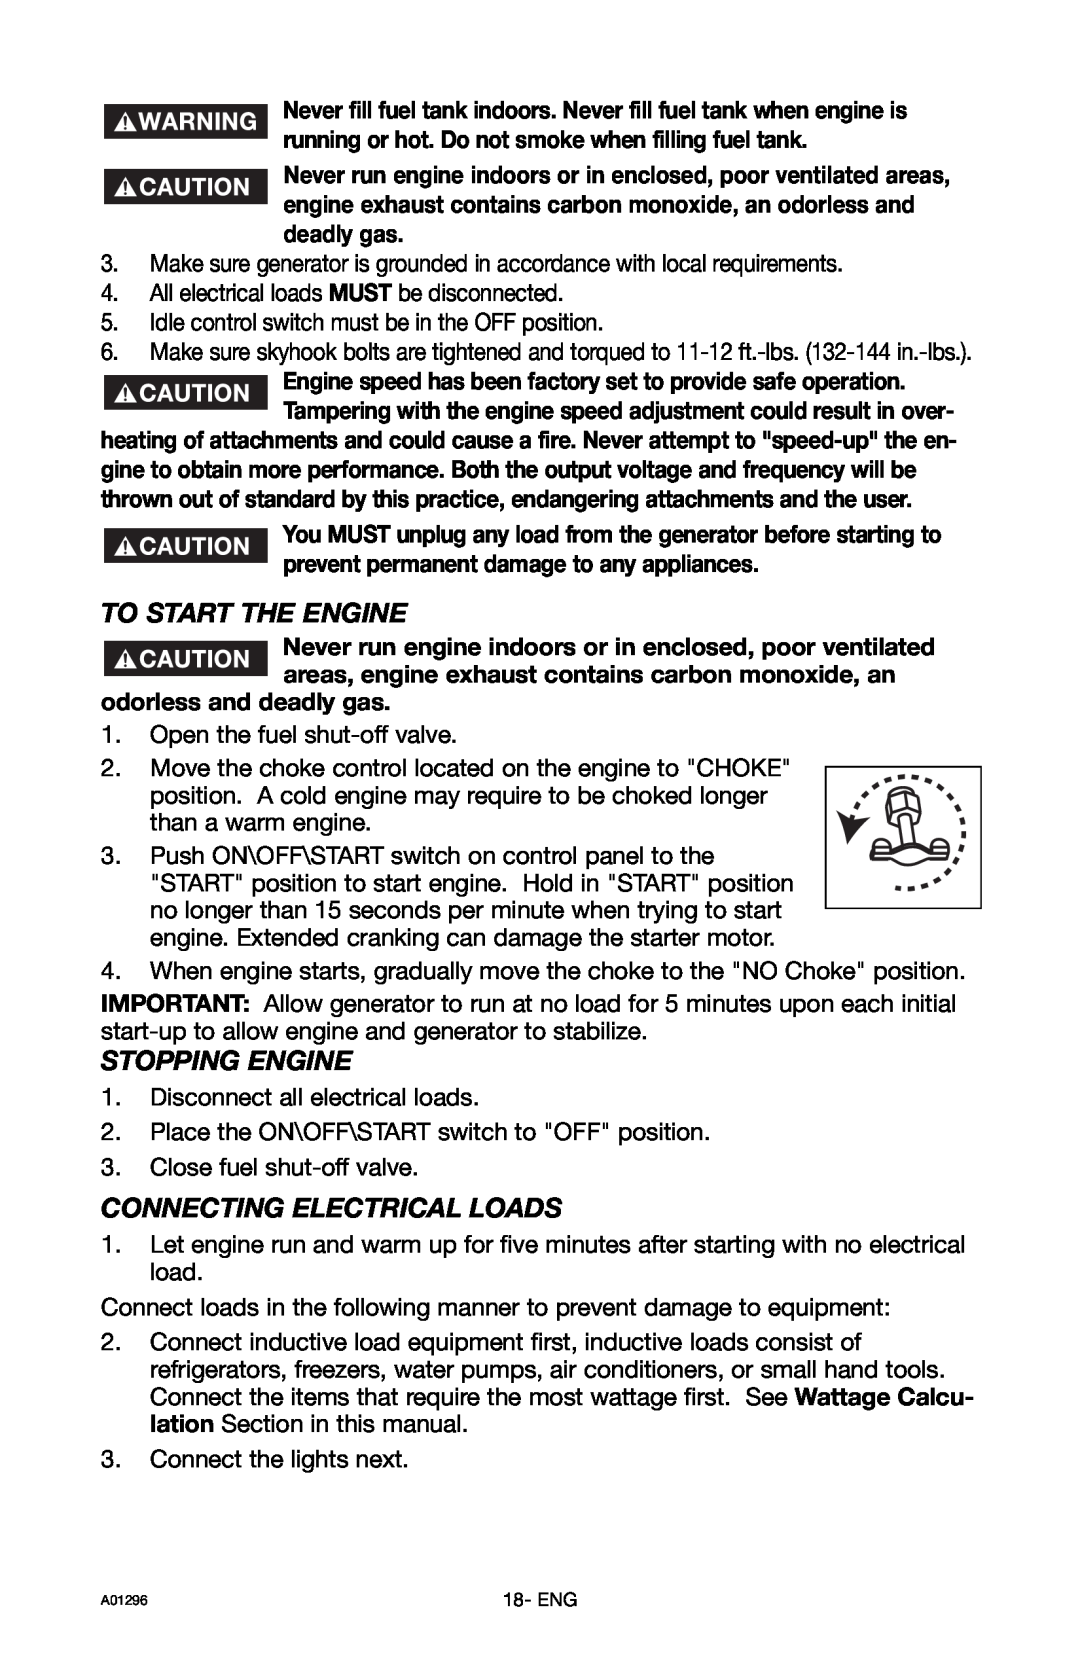 Porter-Cable H1000IS-W instruction manual To Start The Engine, Stopping Engine, Connecting Electrical Loads 